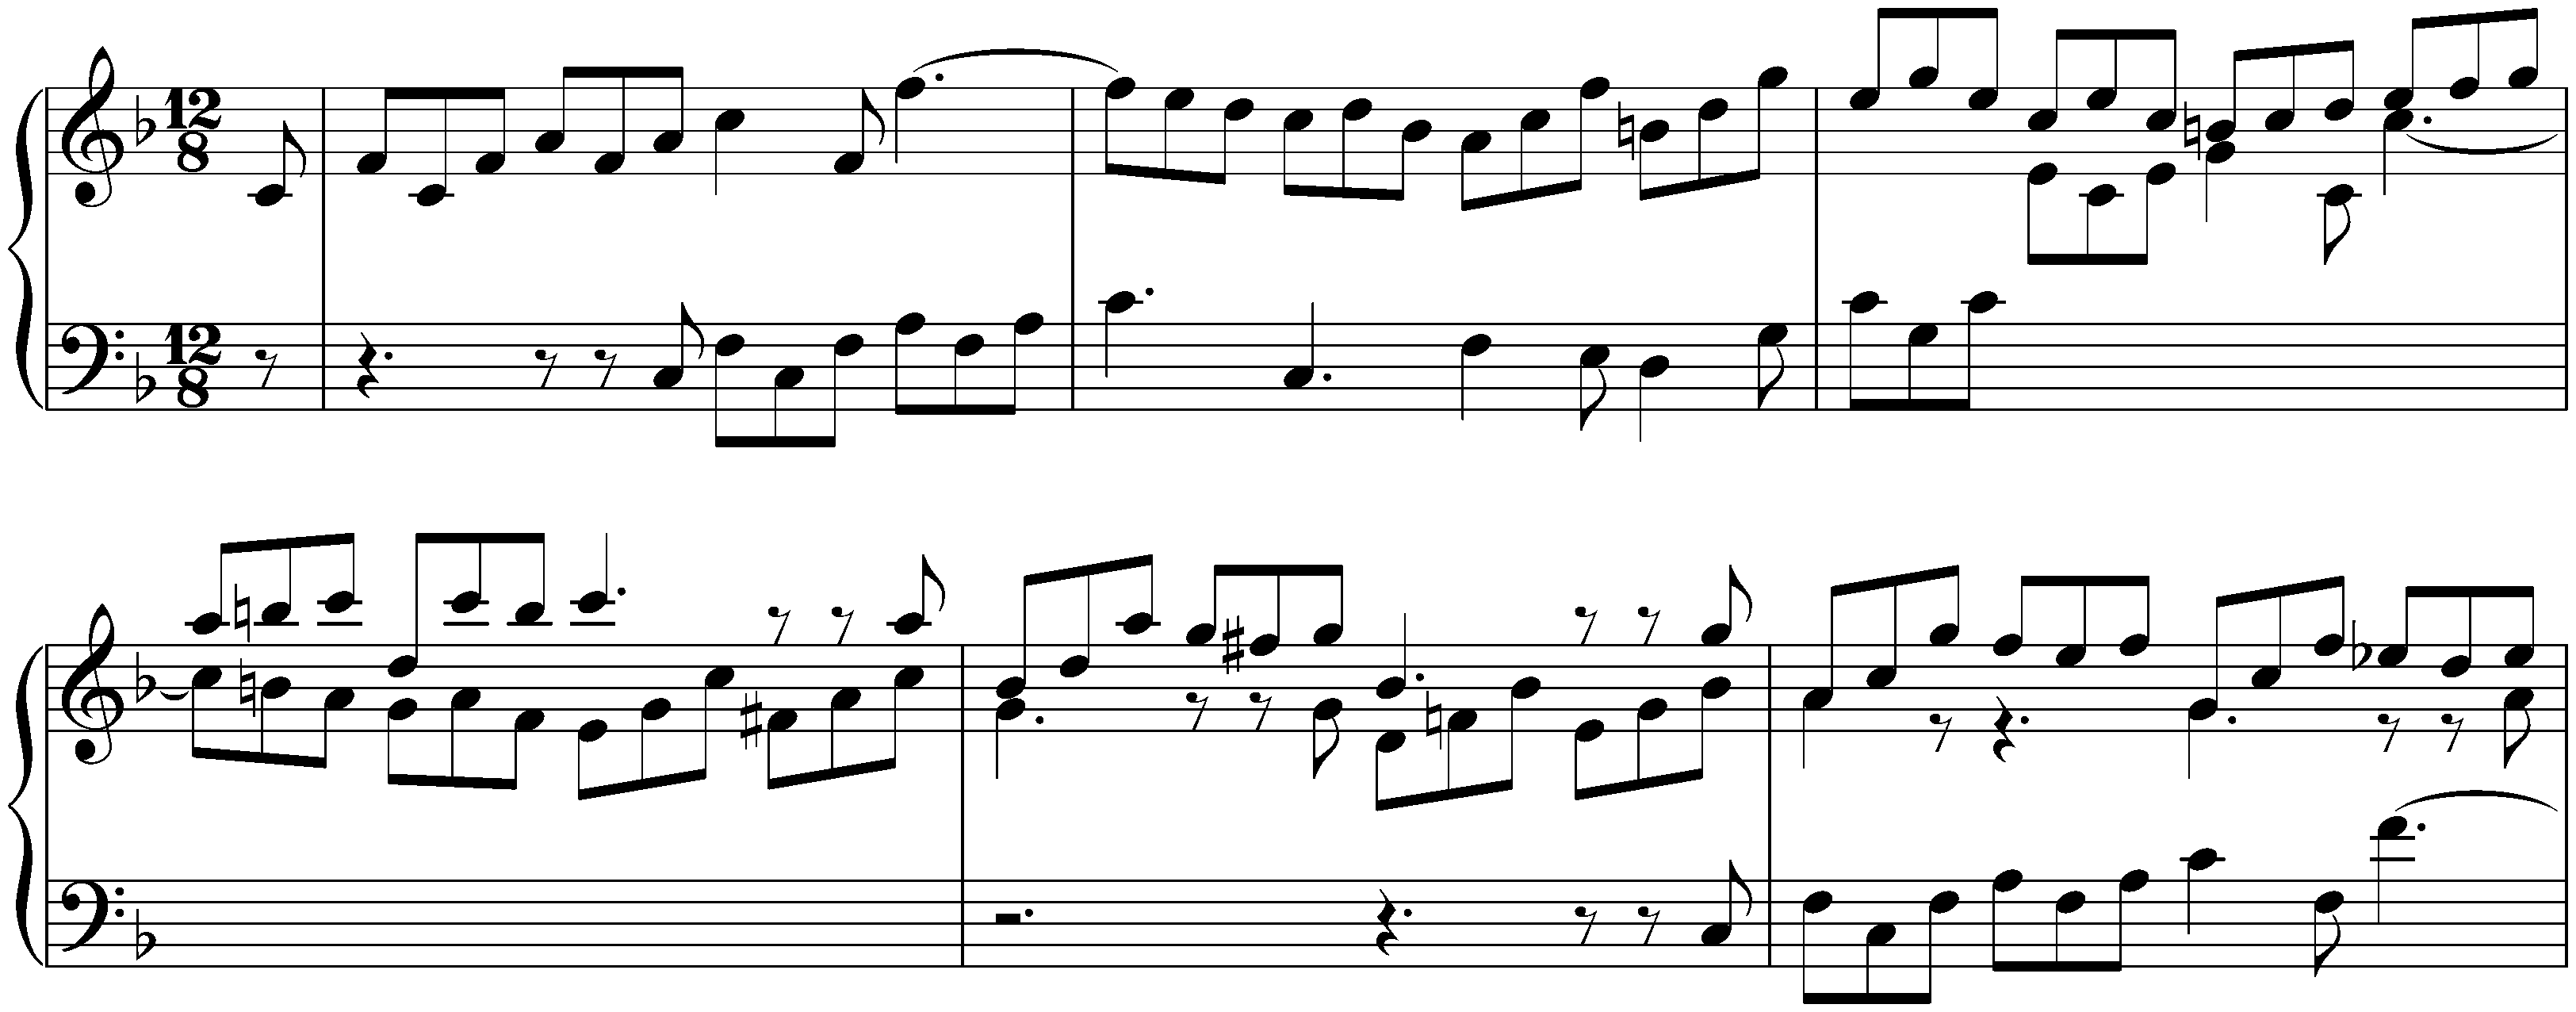 English Suite no. 4 in F major, BWV 809; 6. Gigue